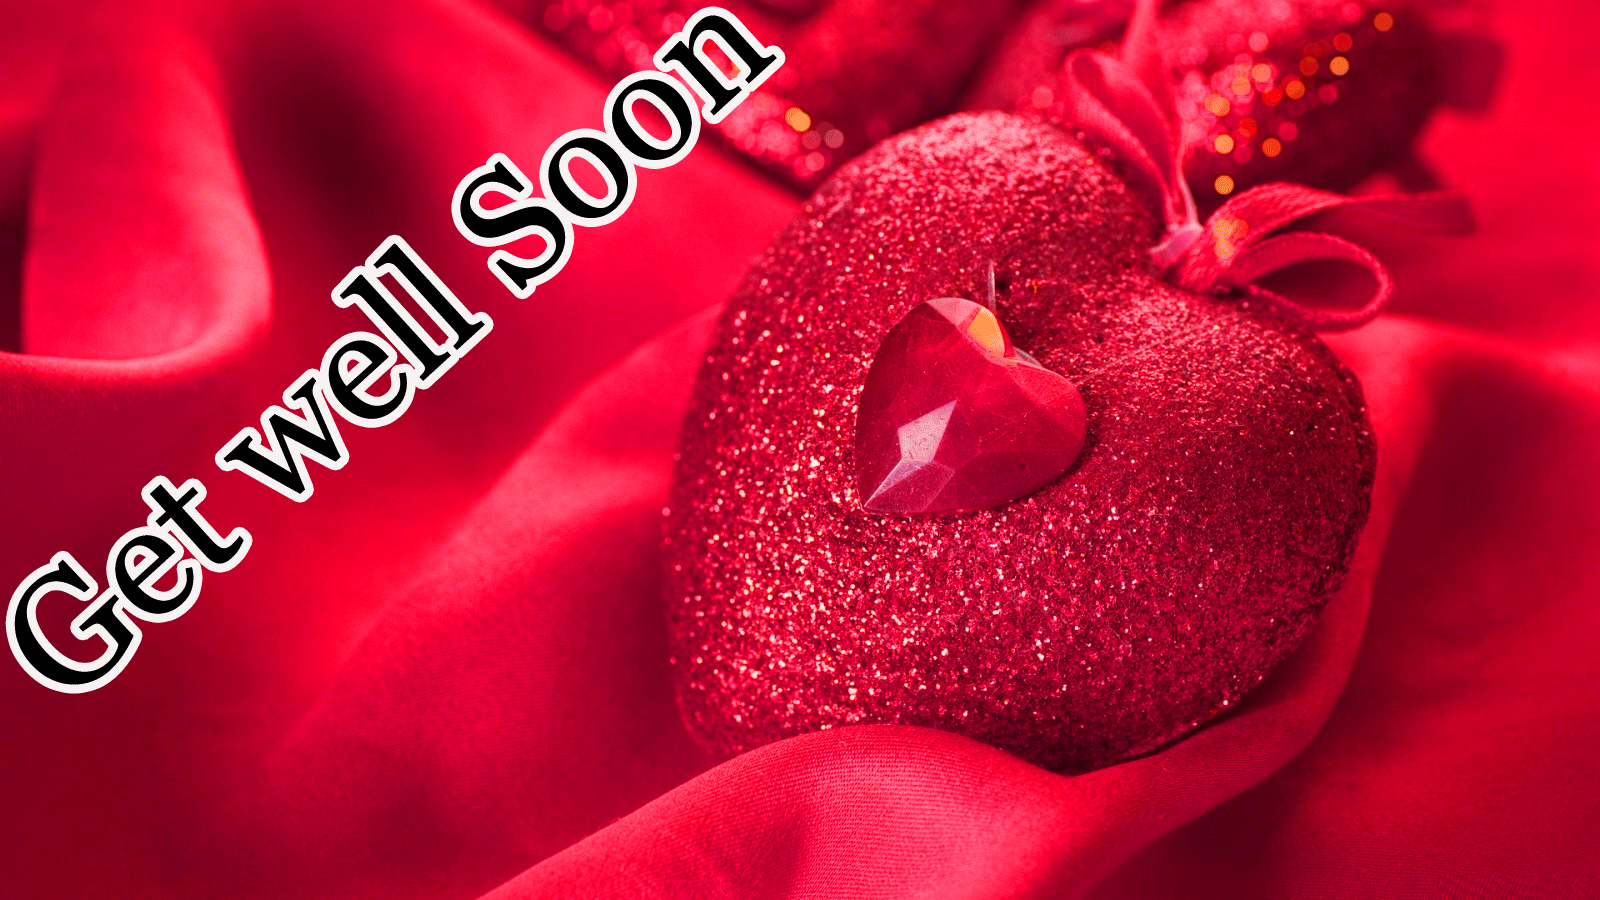 Get Well Soon Image Wallpaper Photo Picture pics For Whatsapp